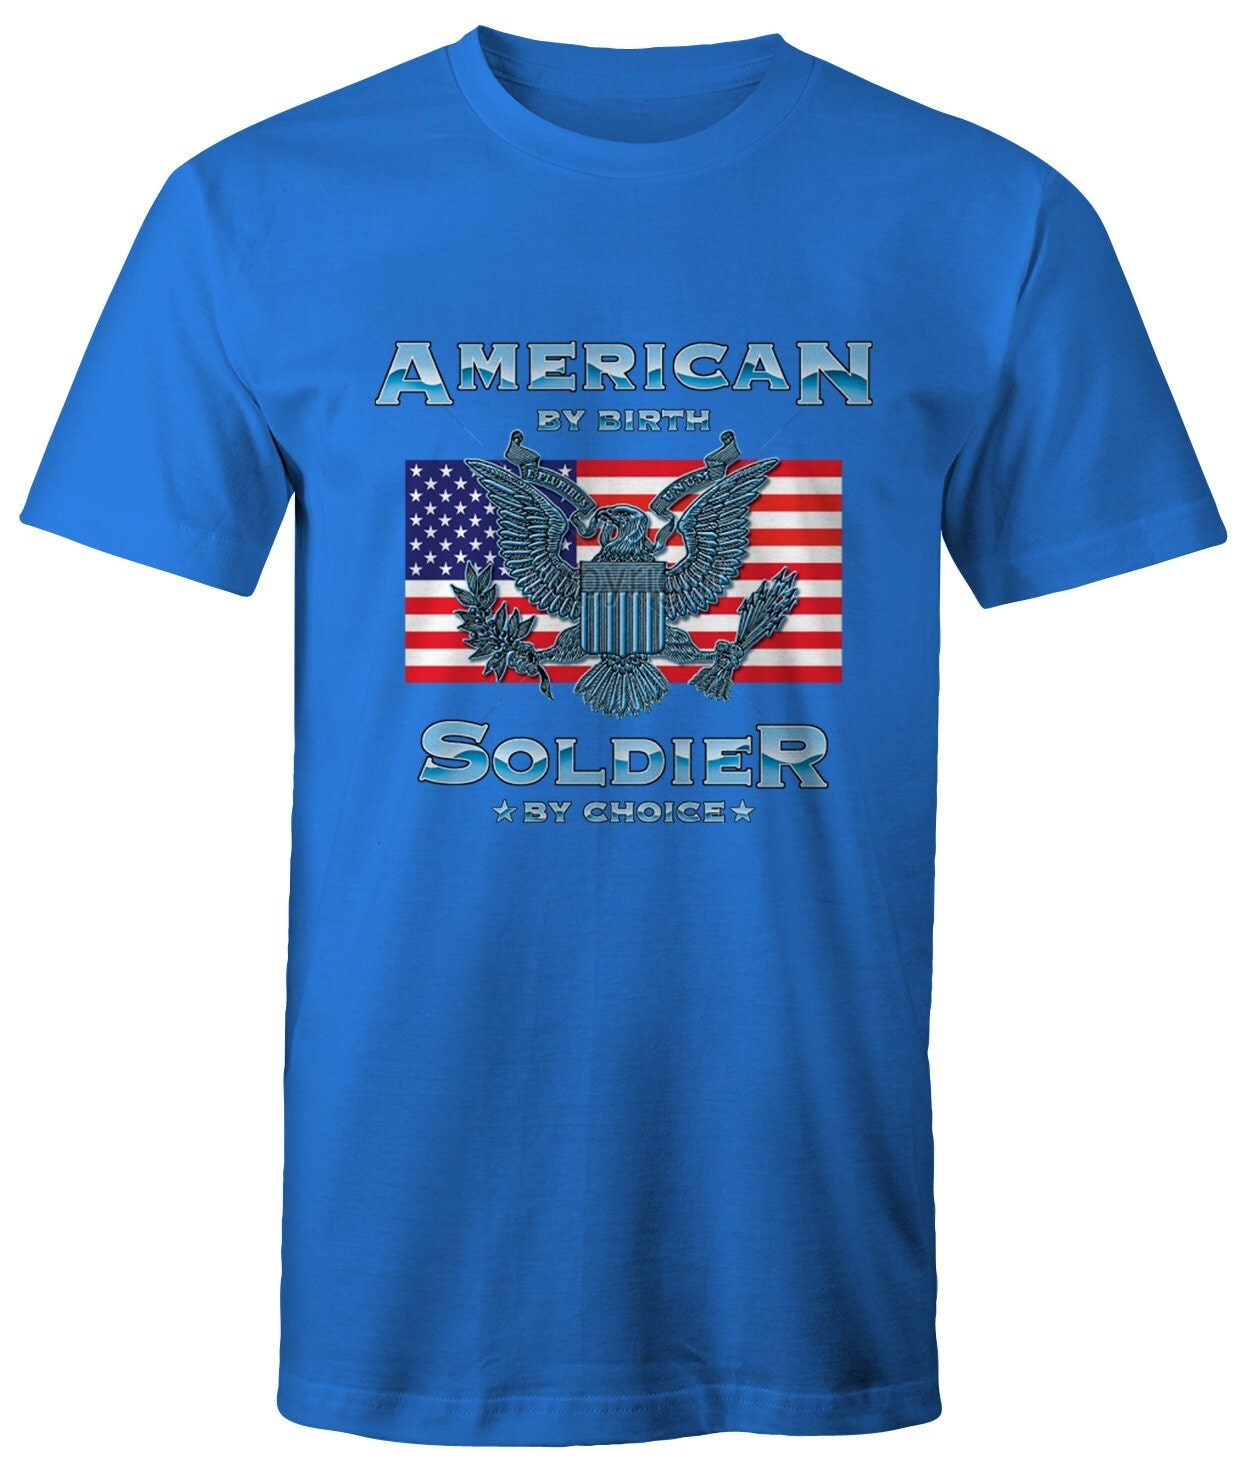 AMERICAN by BIRTH SOLDIER by CHOICEvadult by KRAZ3KsTeesAndDecals